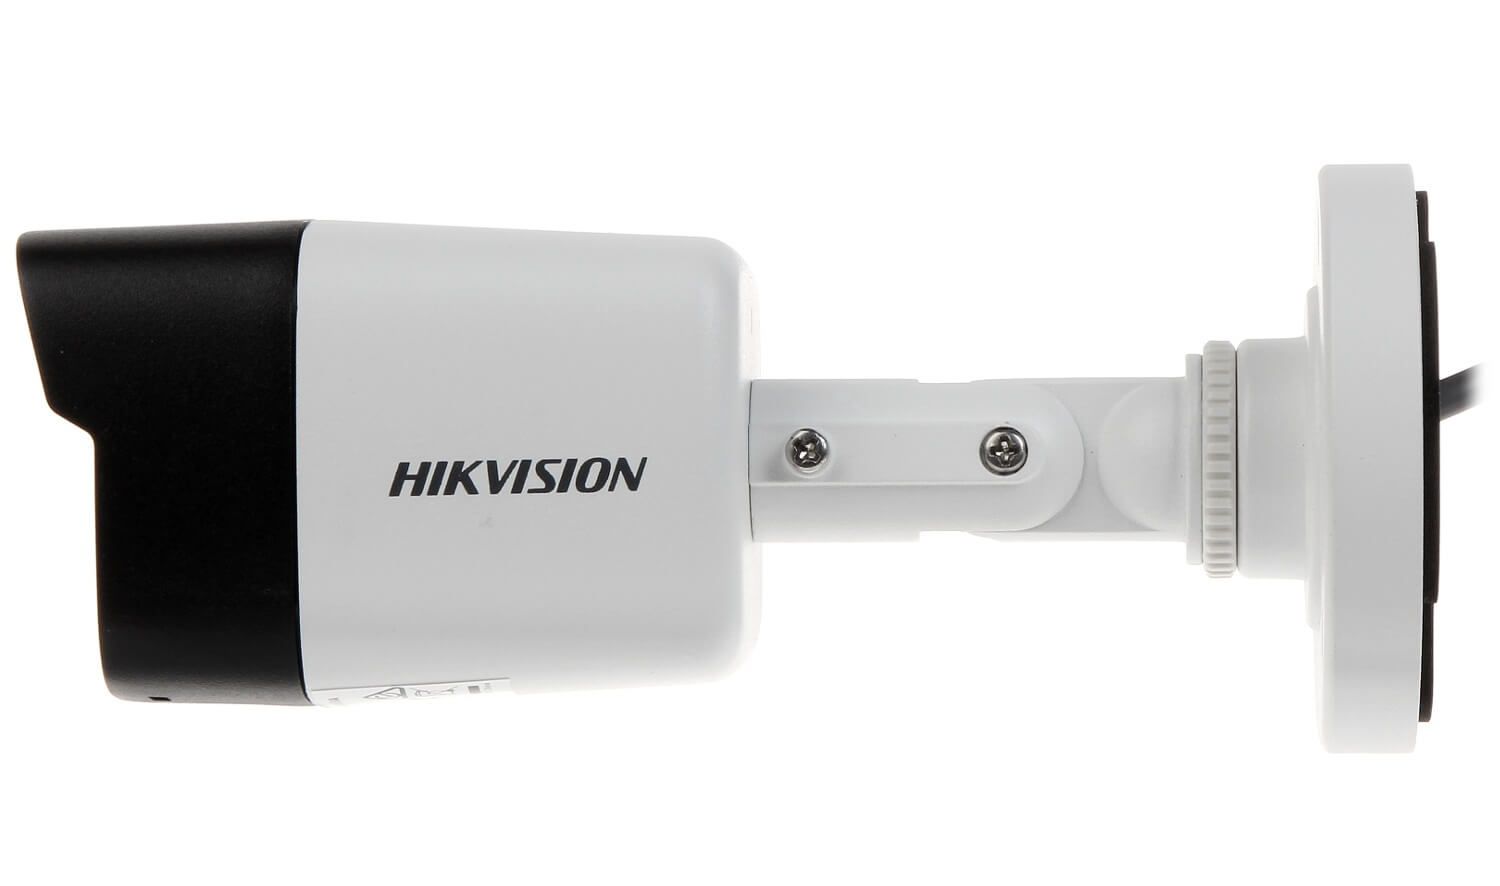 Bán Camera HIKVISION DS-2CE16F1T-ITP giá rẻ